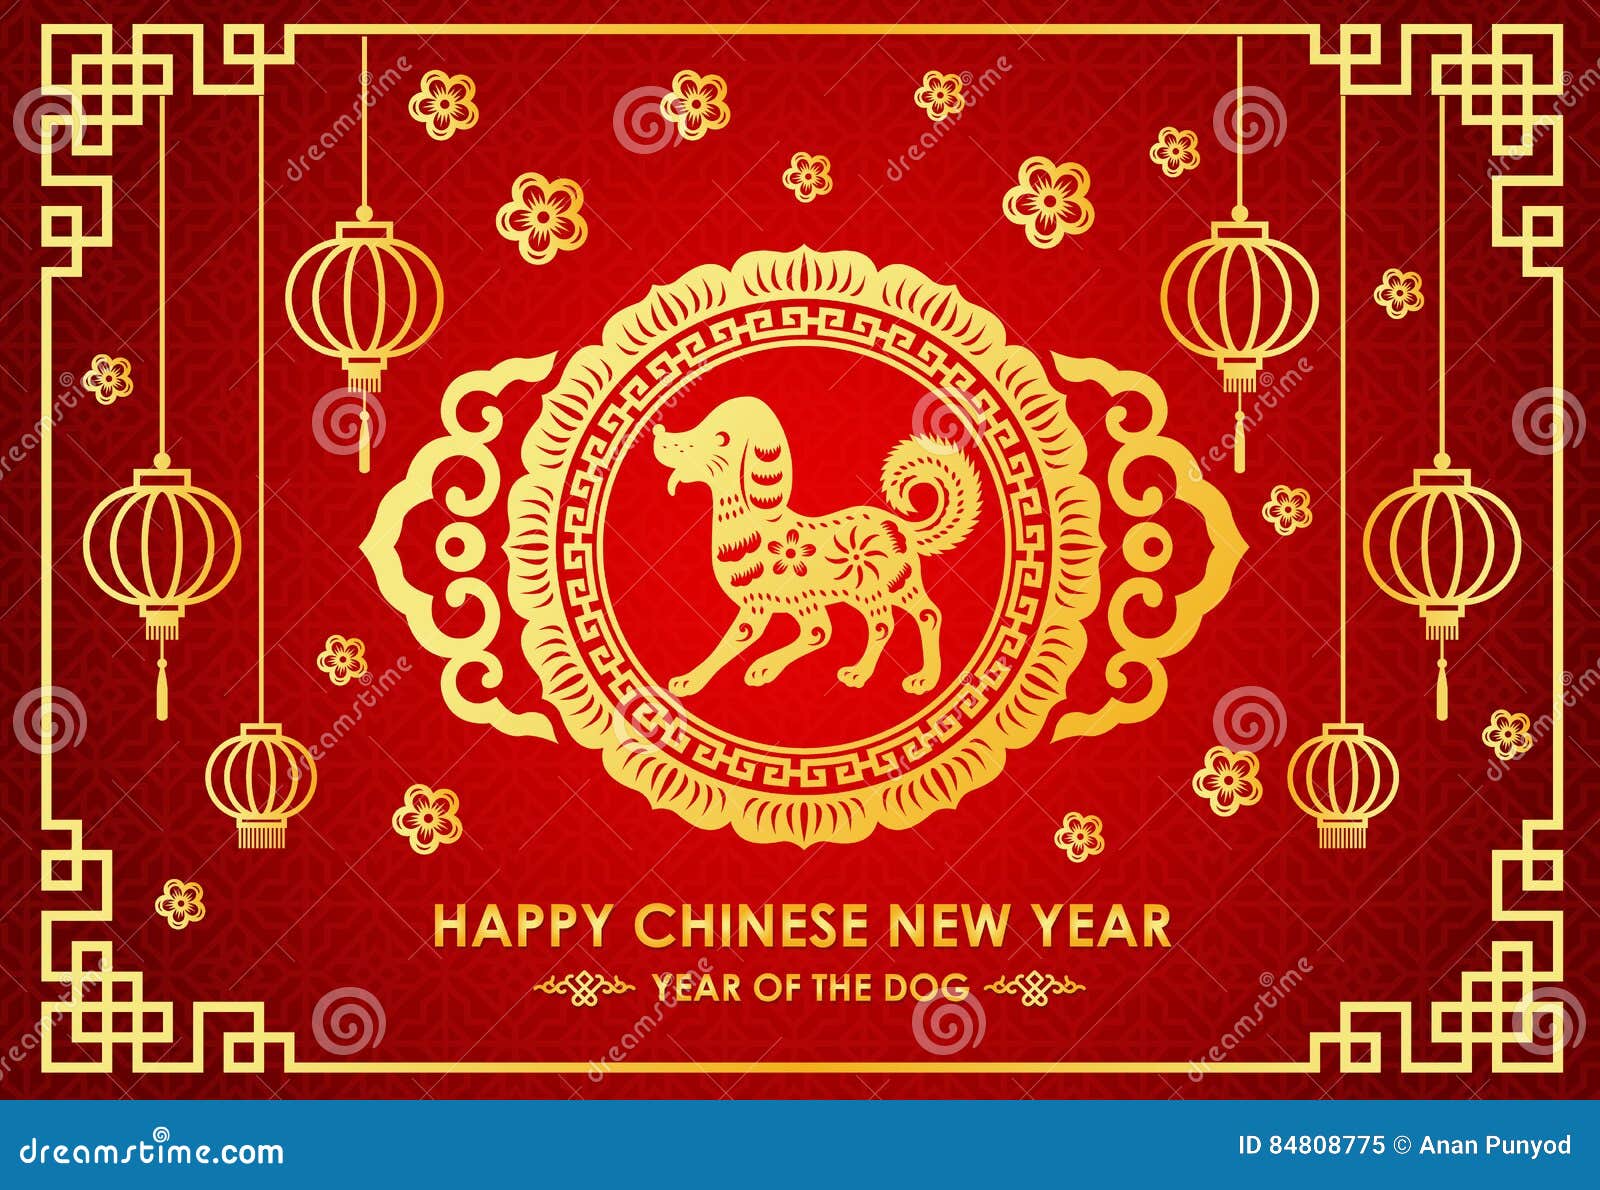 Happy Chinese New Year Card Is Chinese Lantern And Dog ...